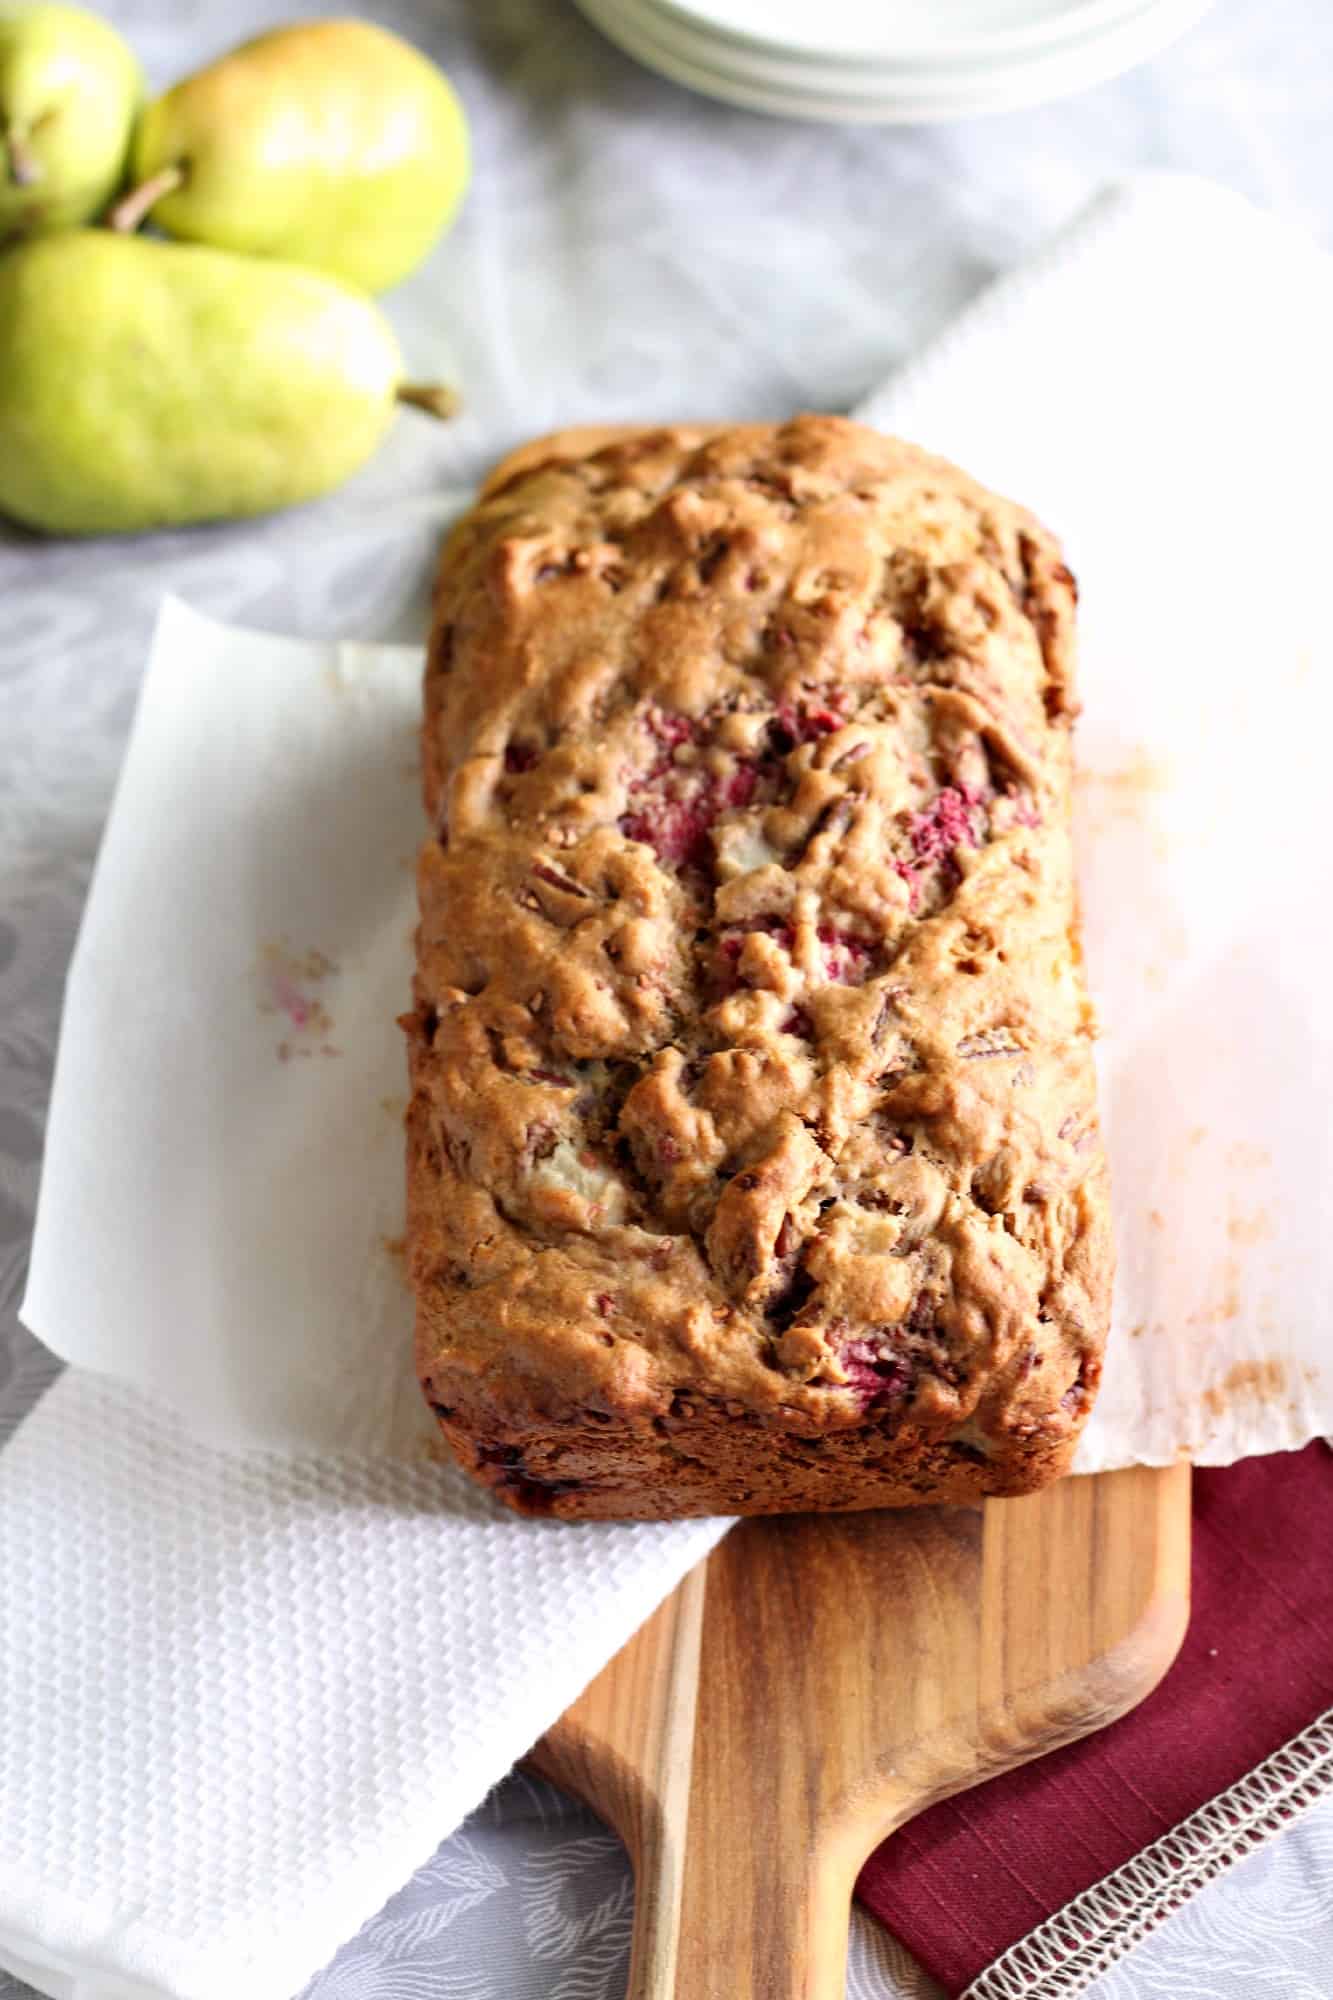 This recipe is loaded with pears, pecans, and raspberries.